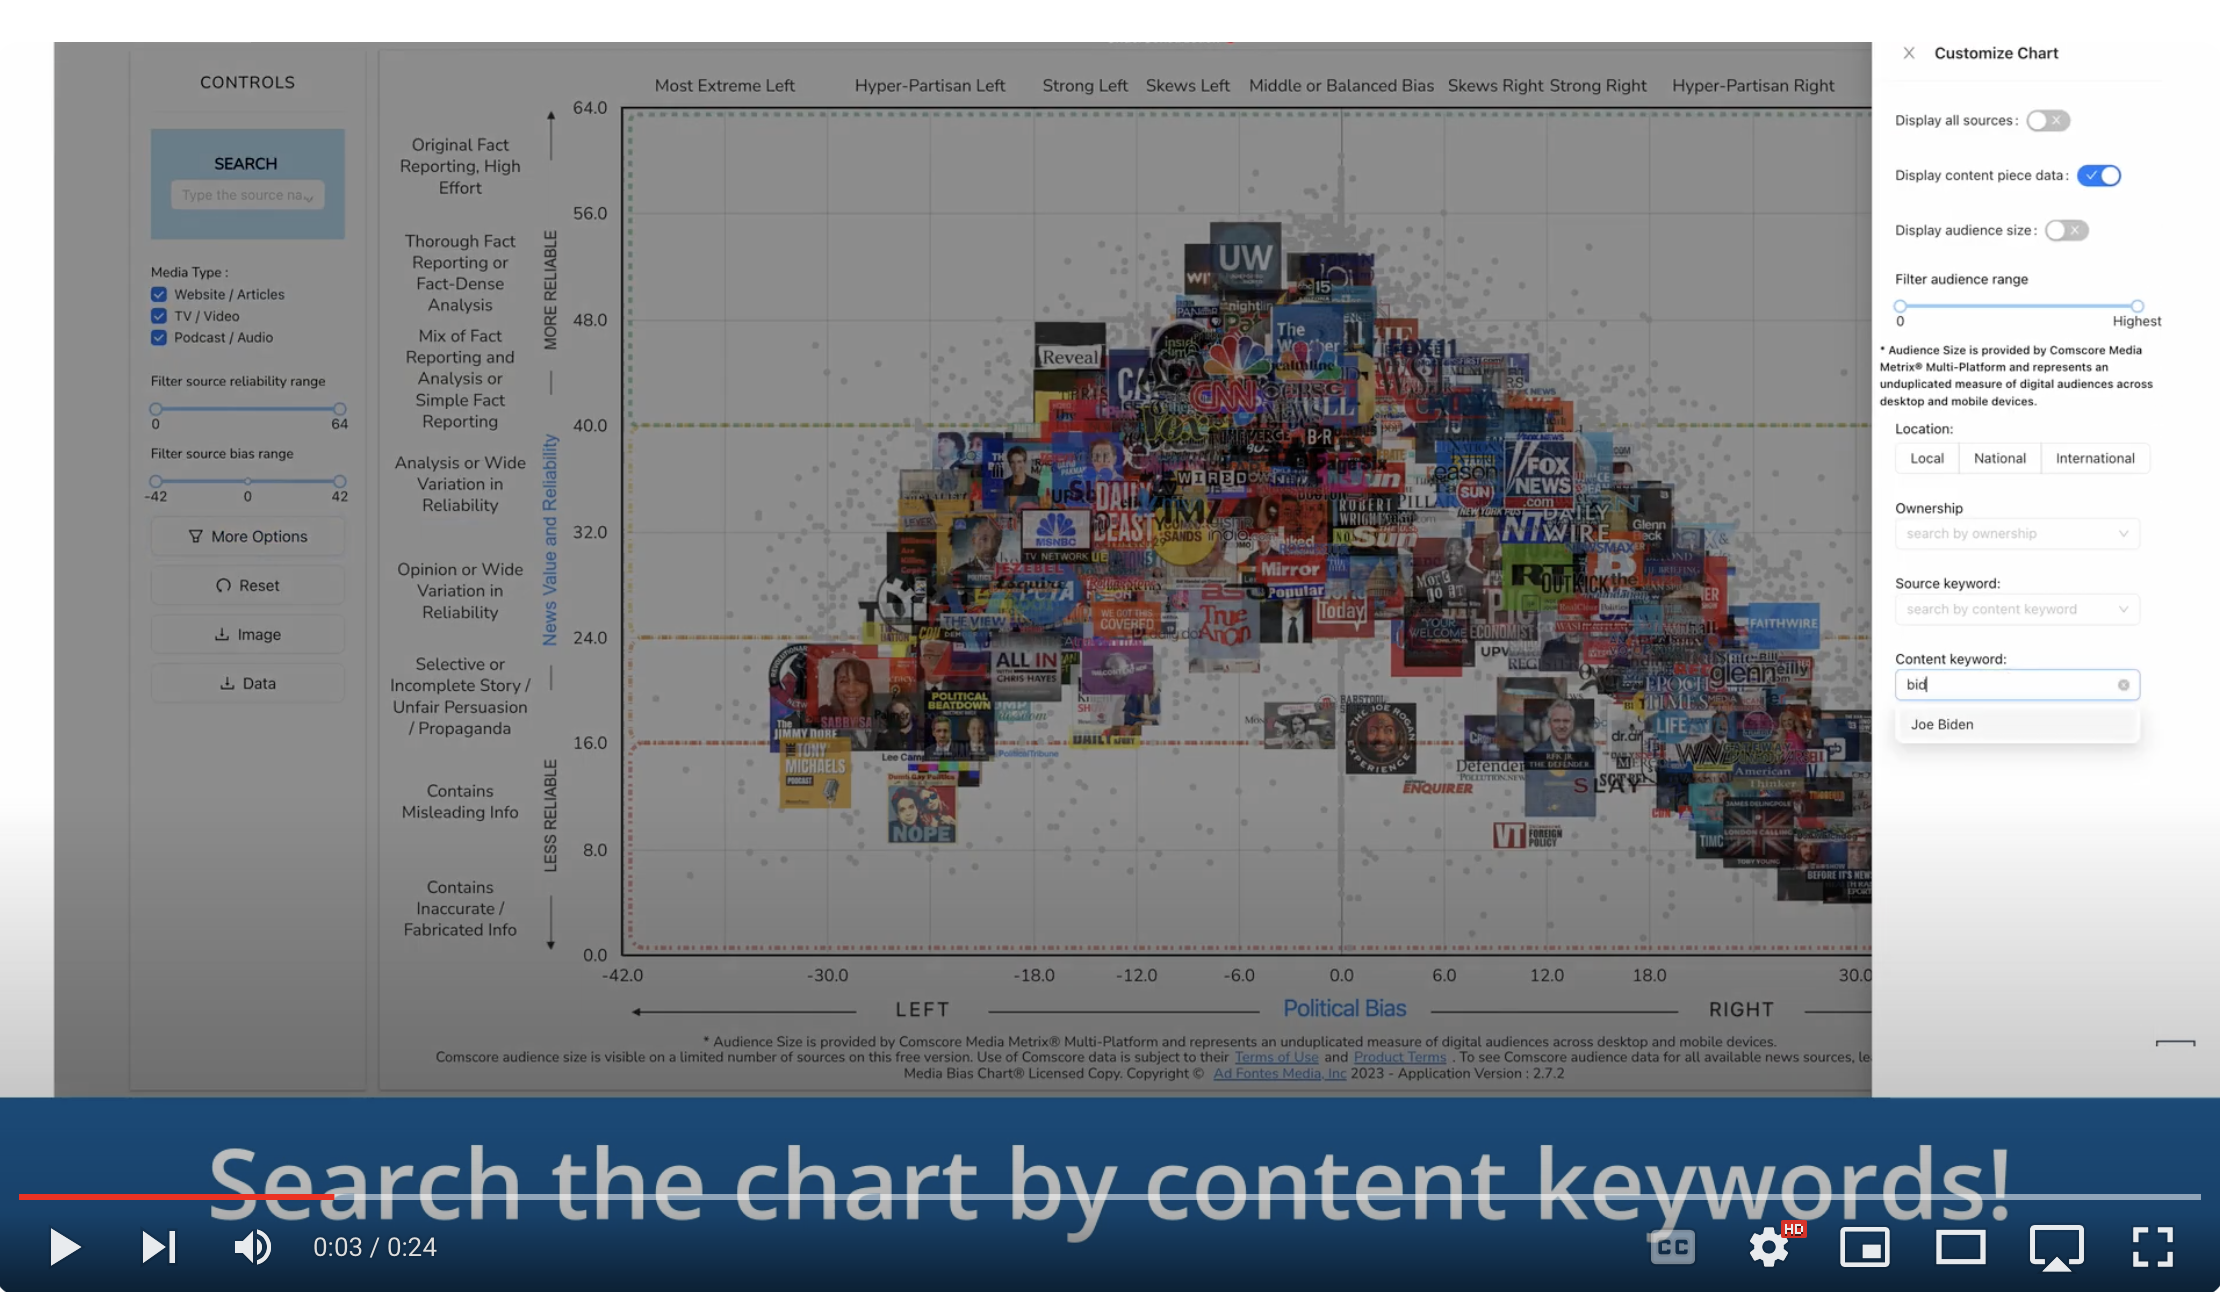 The Media Bias Chart’s content filters allow customers to search ratings by keywords